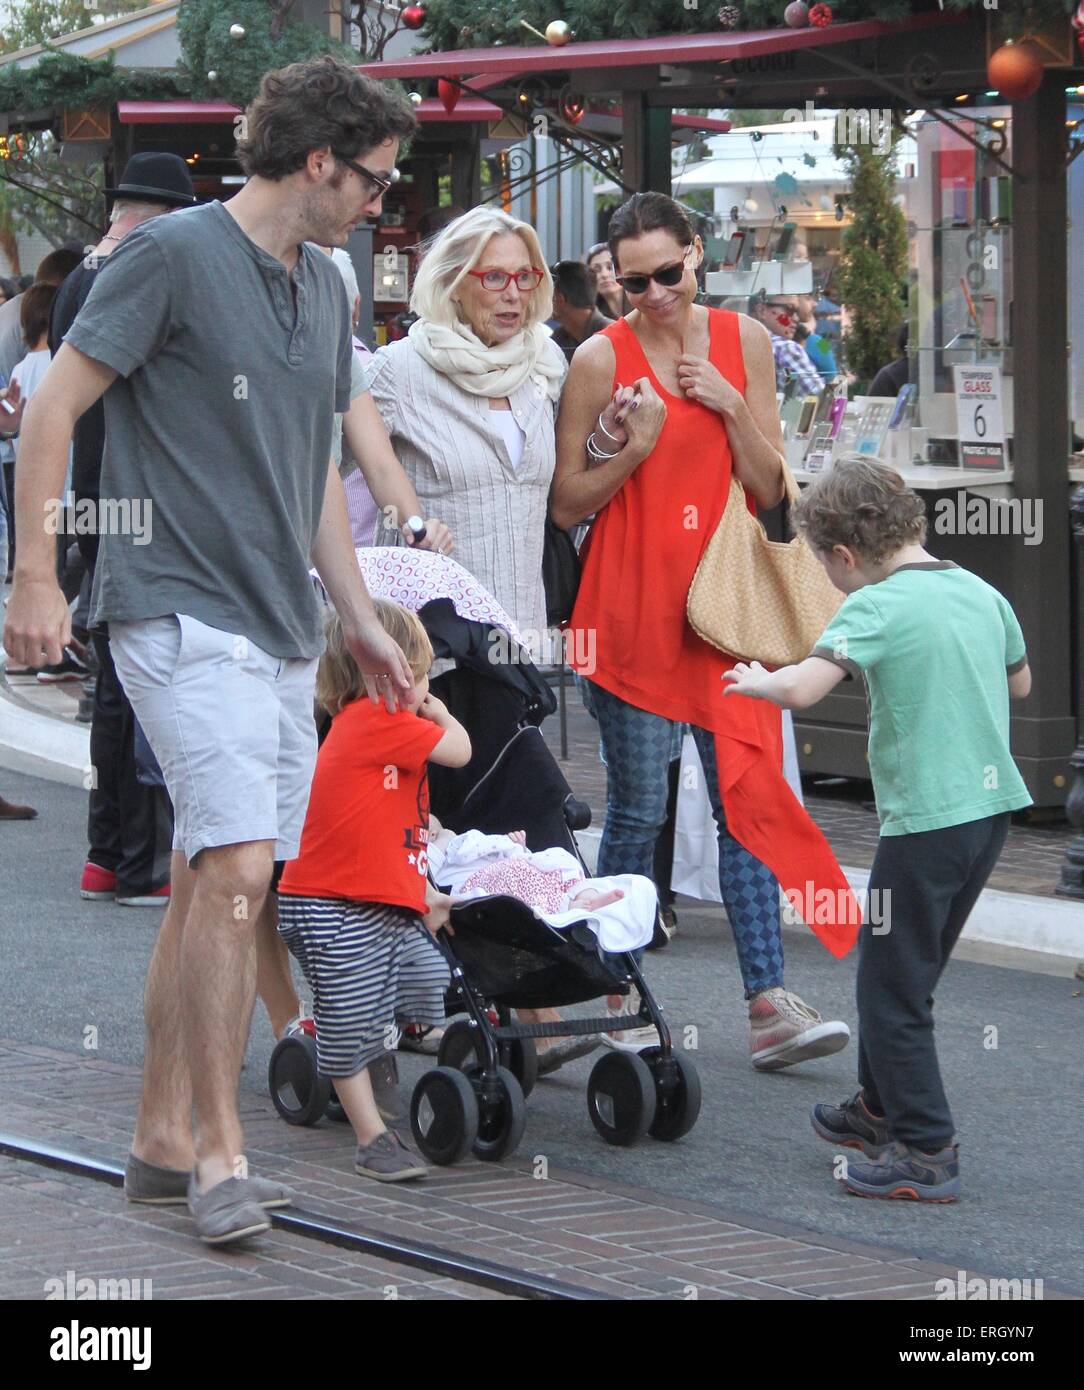 Minnie Driver goes shopping with her family on Black Friday at The Grove  Featuring: Minnie Driver,Henry Story Driver,Mother Gaynor Churchyard,sister Kate Where: Hollywood, California, United States When: 28 Nov 2014 Credit: WENN.com Stock Photo